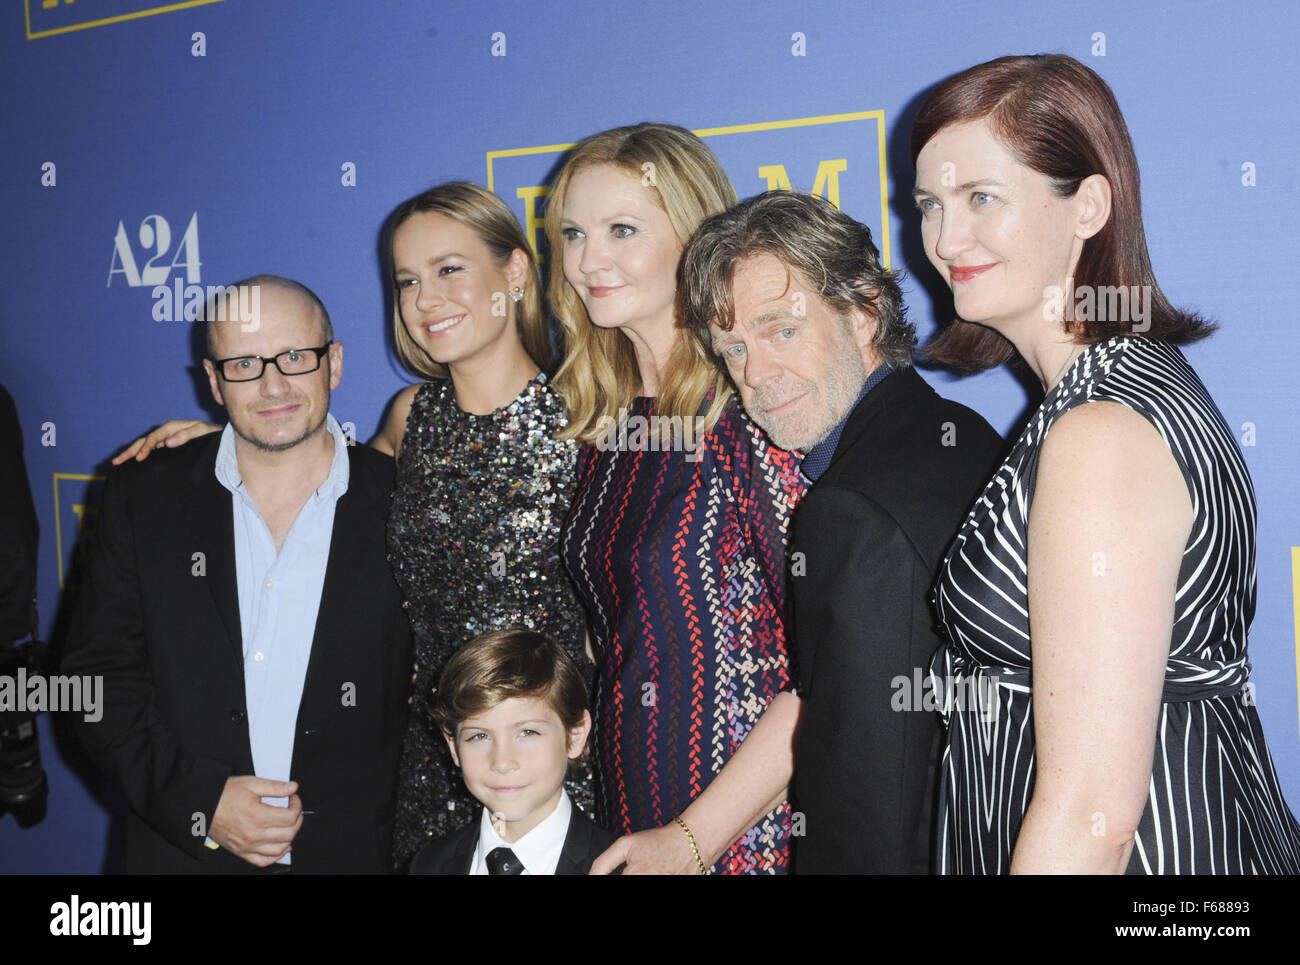 Premiere Of A24's 'Room' at the Pacific Design Center - Arrivals  Featuring: Brie Larson, Joan Allen, William H. Macy, Jacob Tremblay, Emma Donoghue, Lenny Abrahamson Where: Los Angeles, California, United States When: 13 Oct 2015 Stock Photo